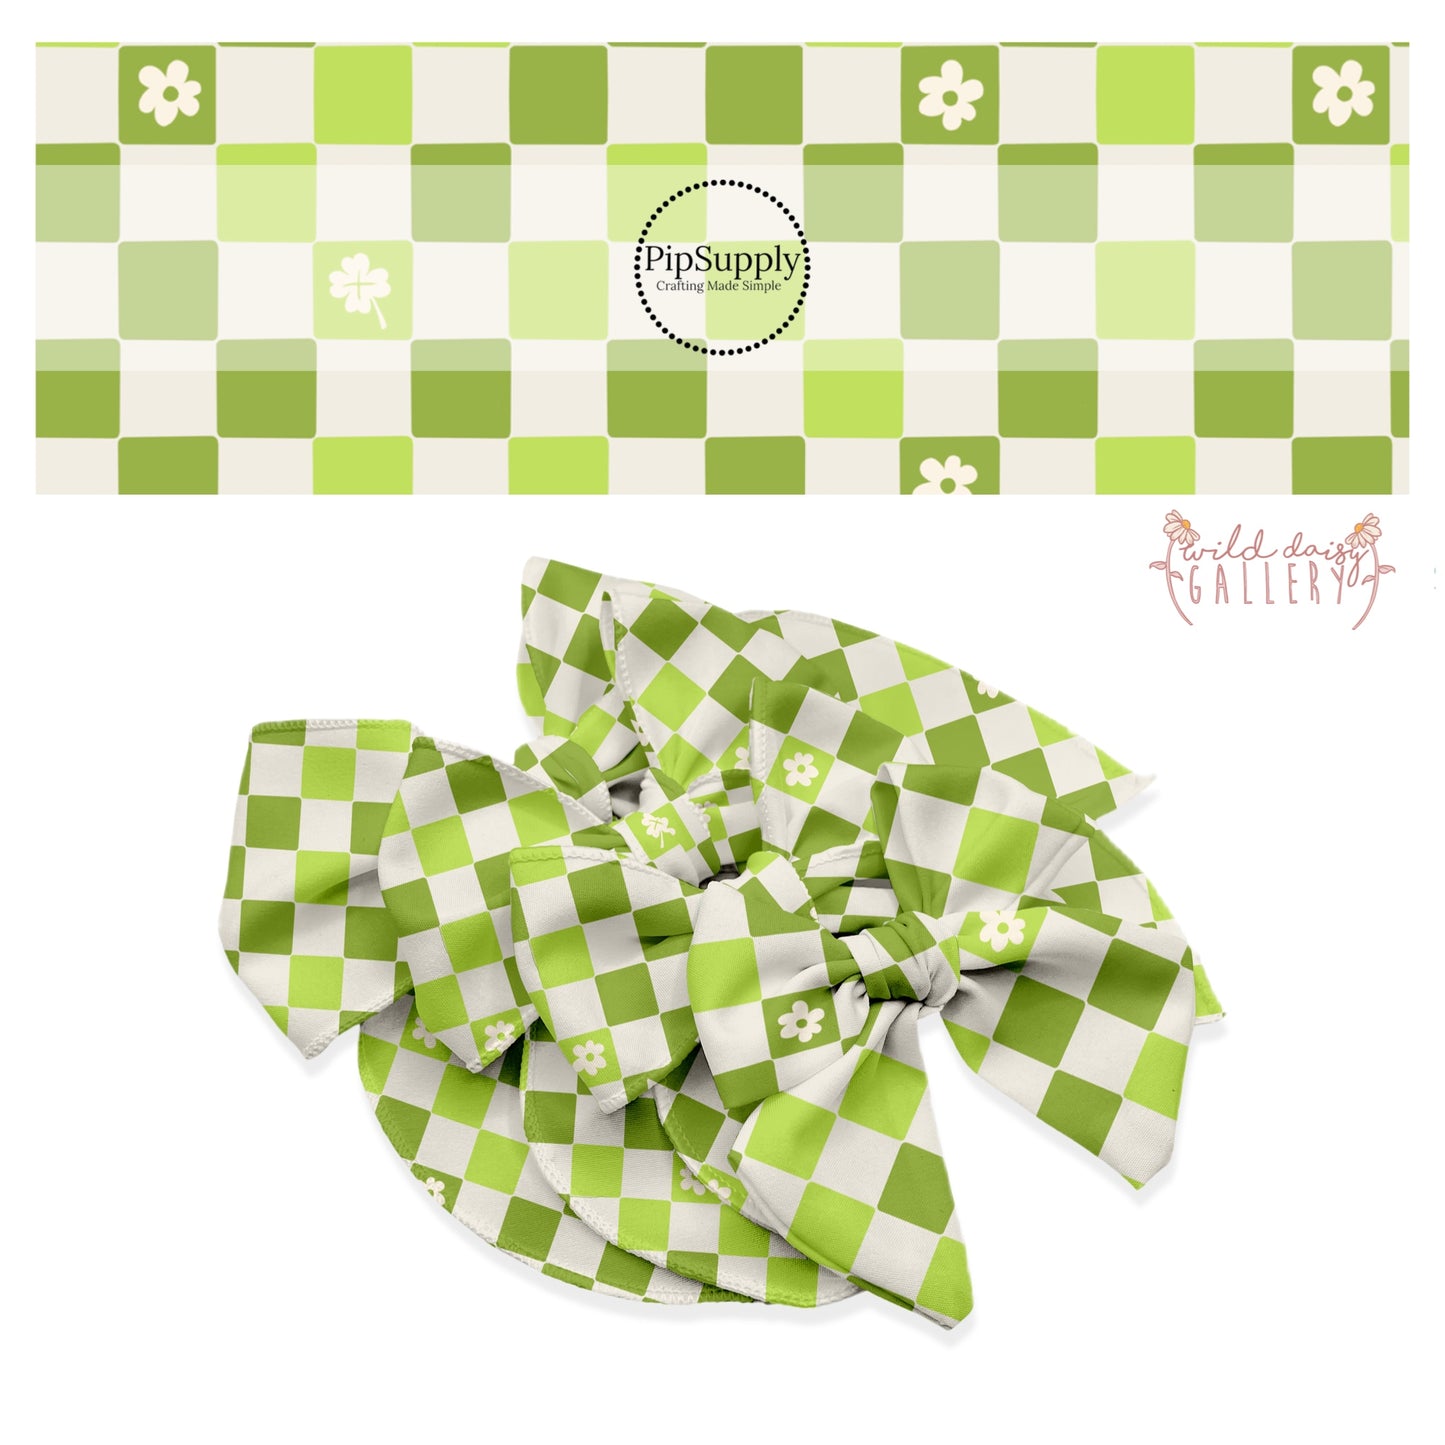 4 leaf clover and white daisy cutputs on green checker bow strips